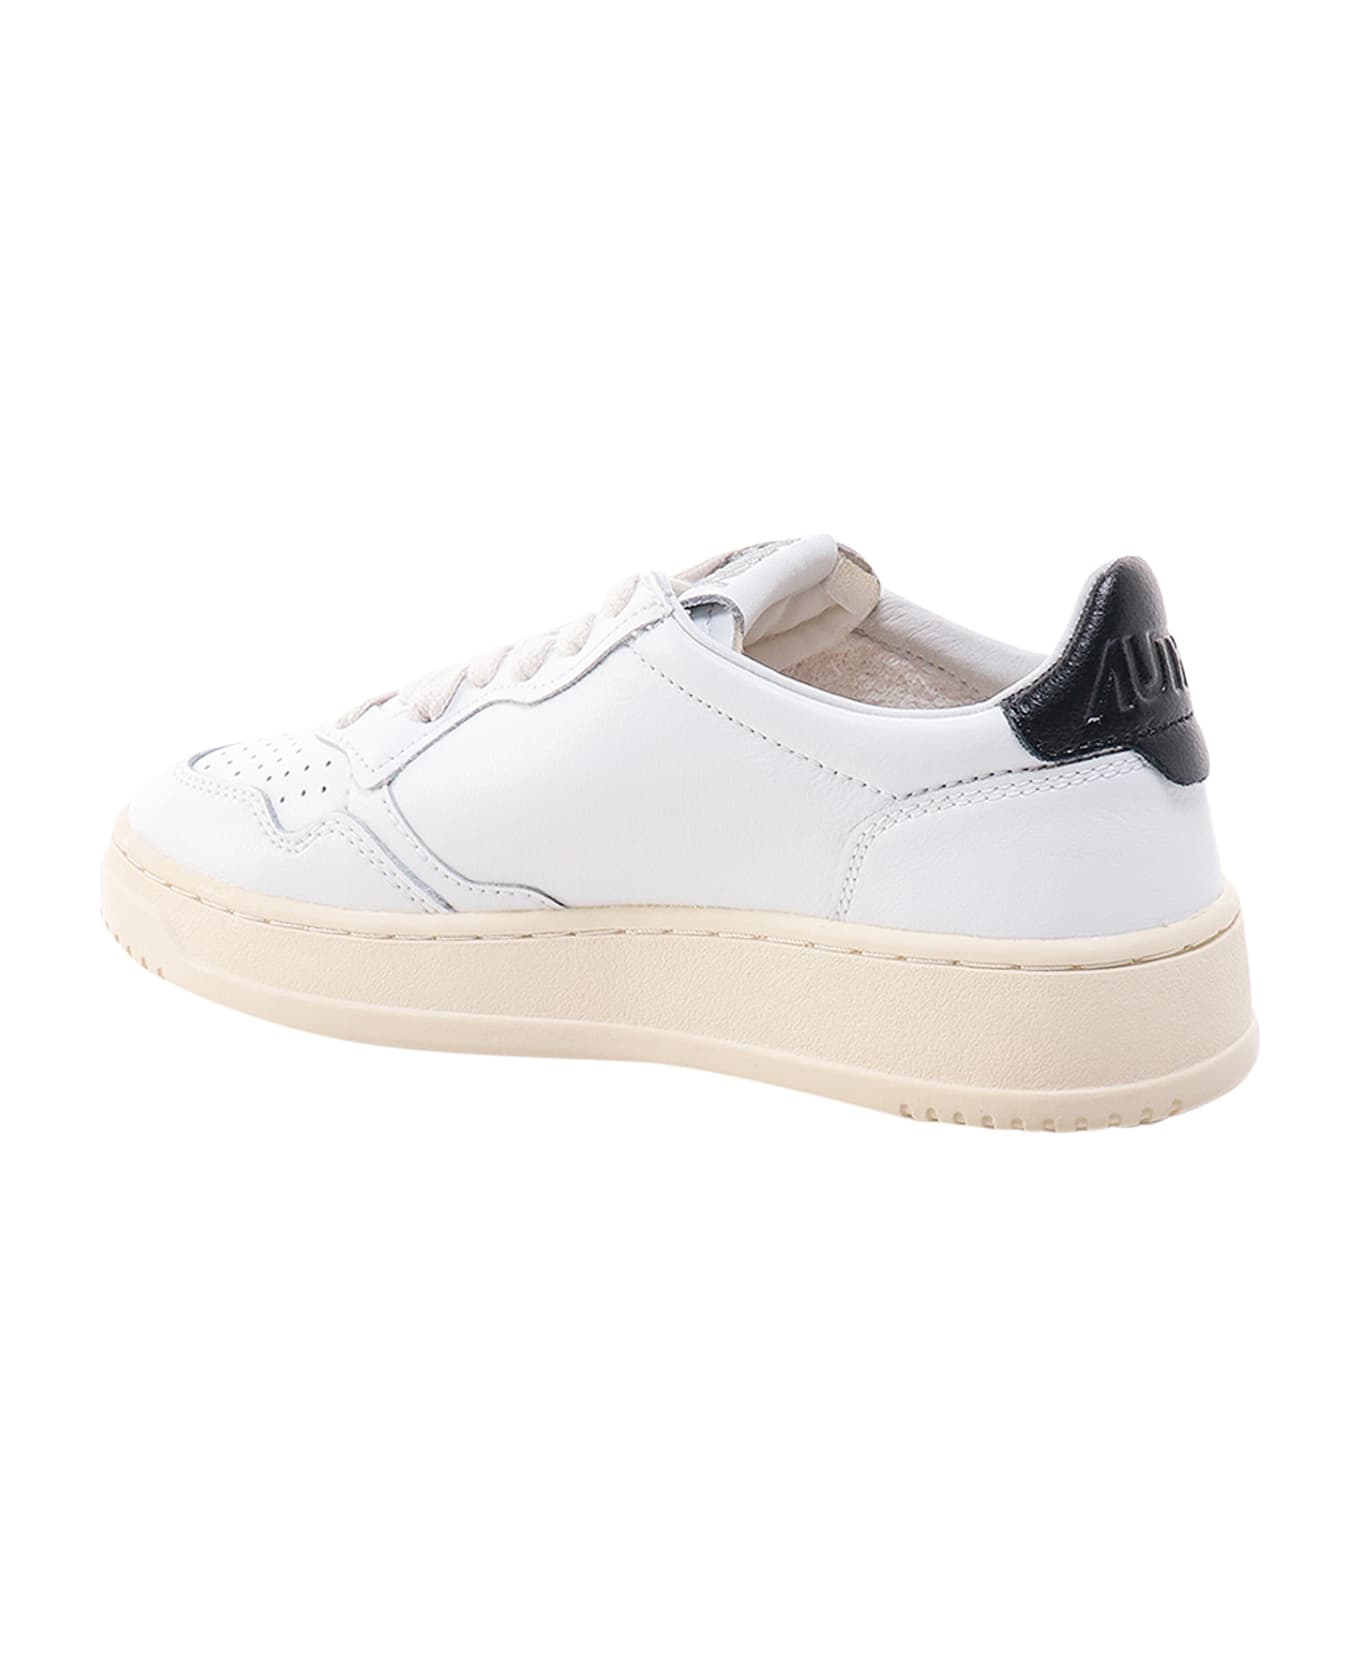 Autry Sneakers - Bianco スニーカー